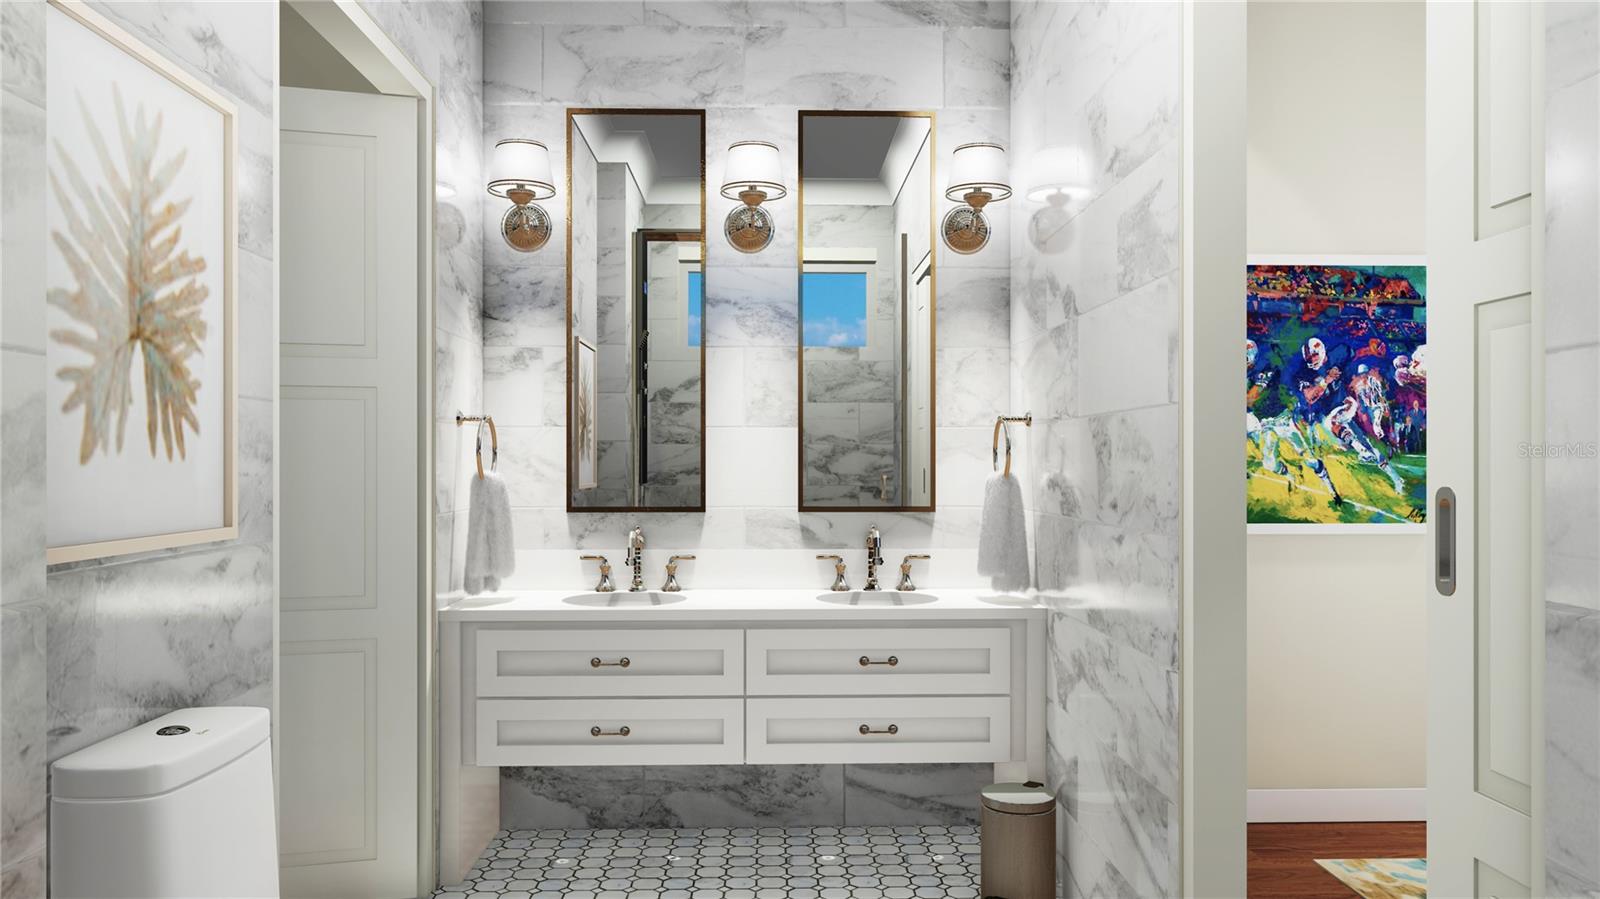 Even the guests bathroom has the double sink! Digital rendering....